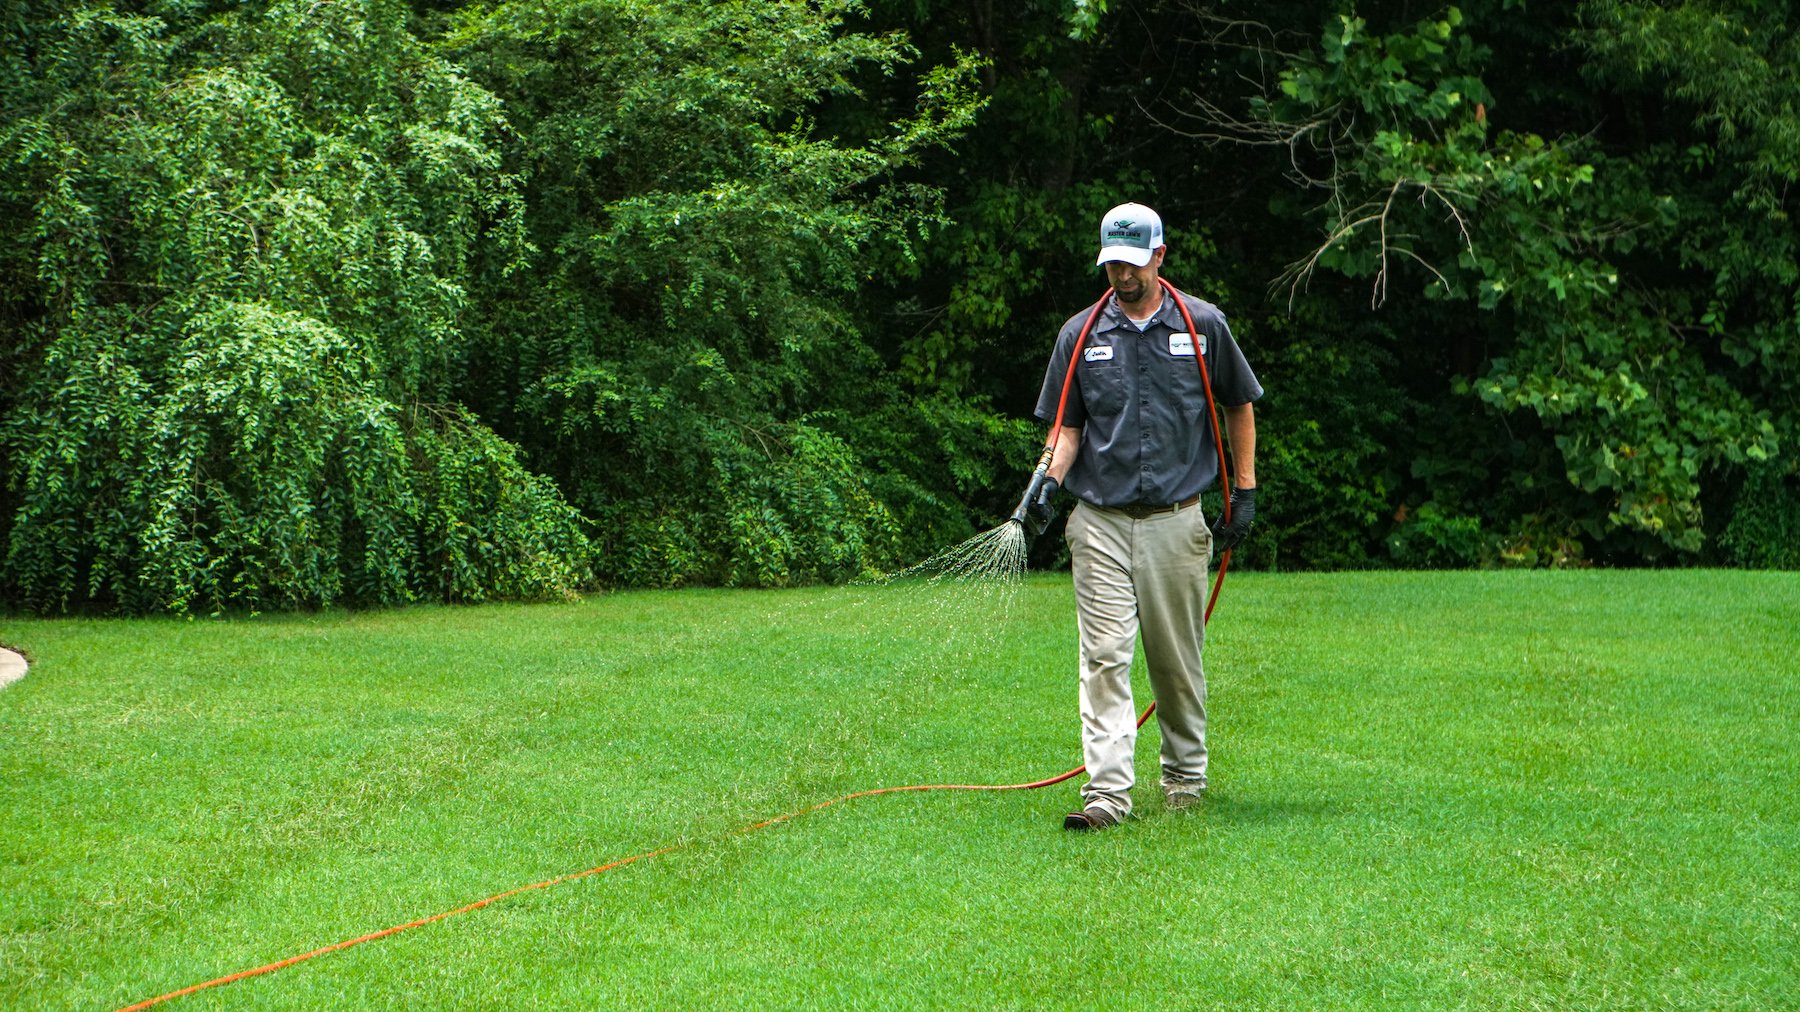 Weed control lawn care technician spraying